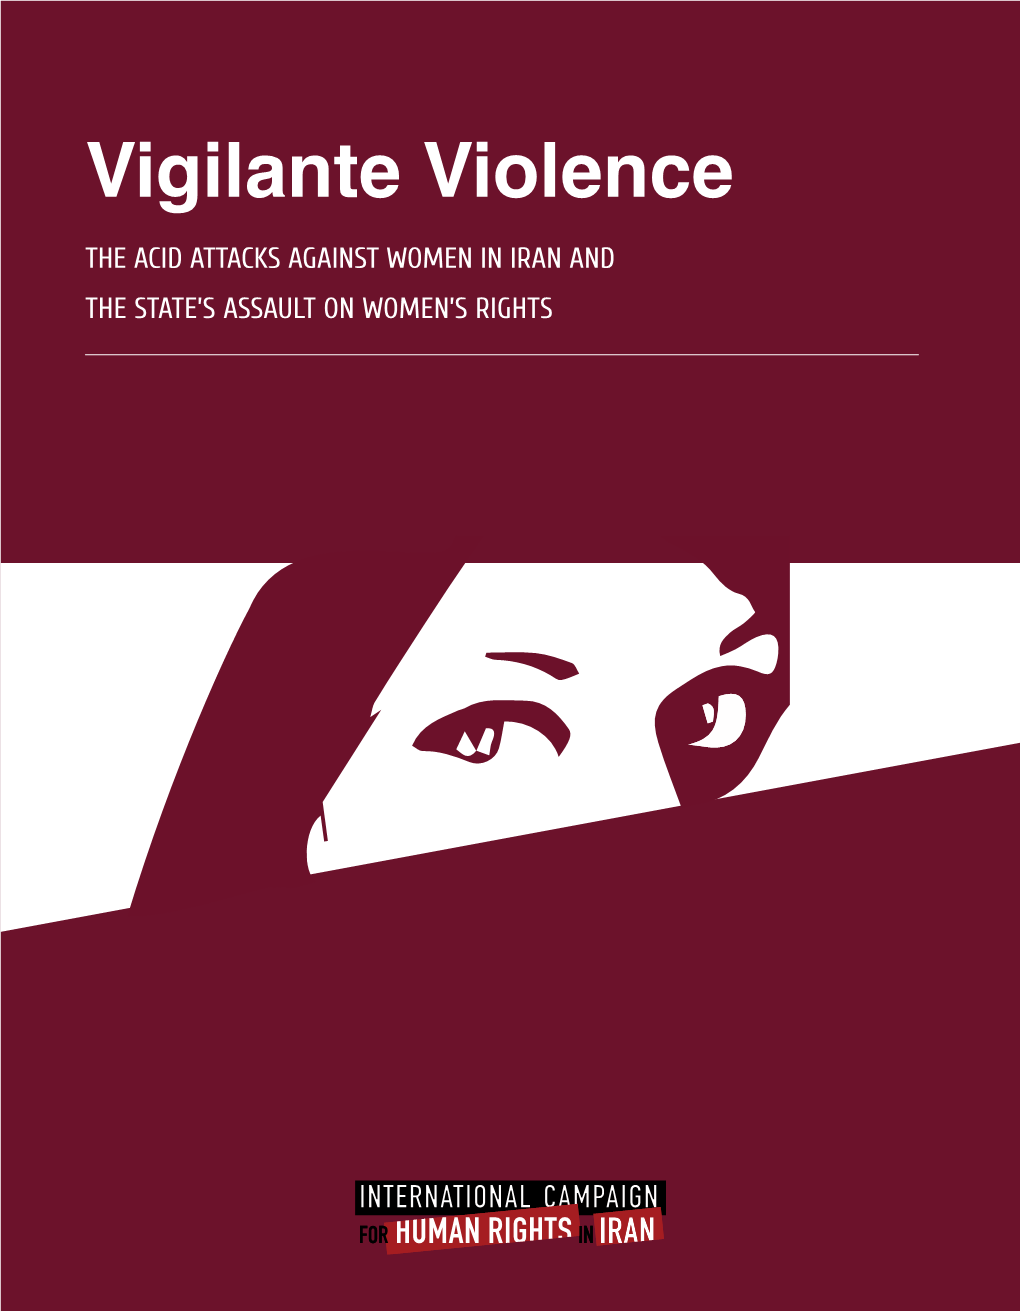 Vigilante Violence the ACID ATTACKS AGAINST WOMEN in IRAN and the STATE’S ASSAULT on WOMEN’S RIGHTS